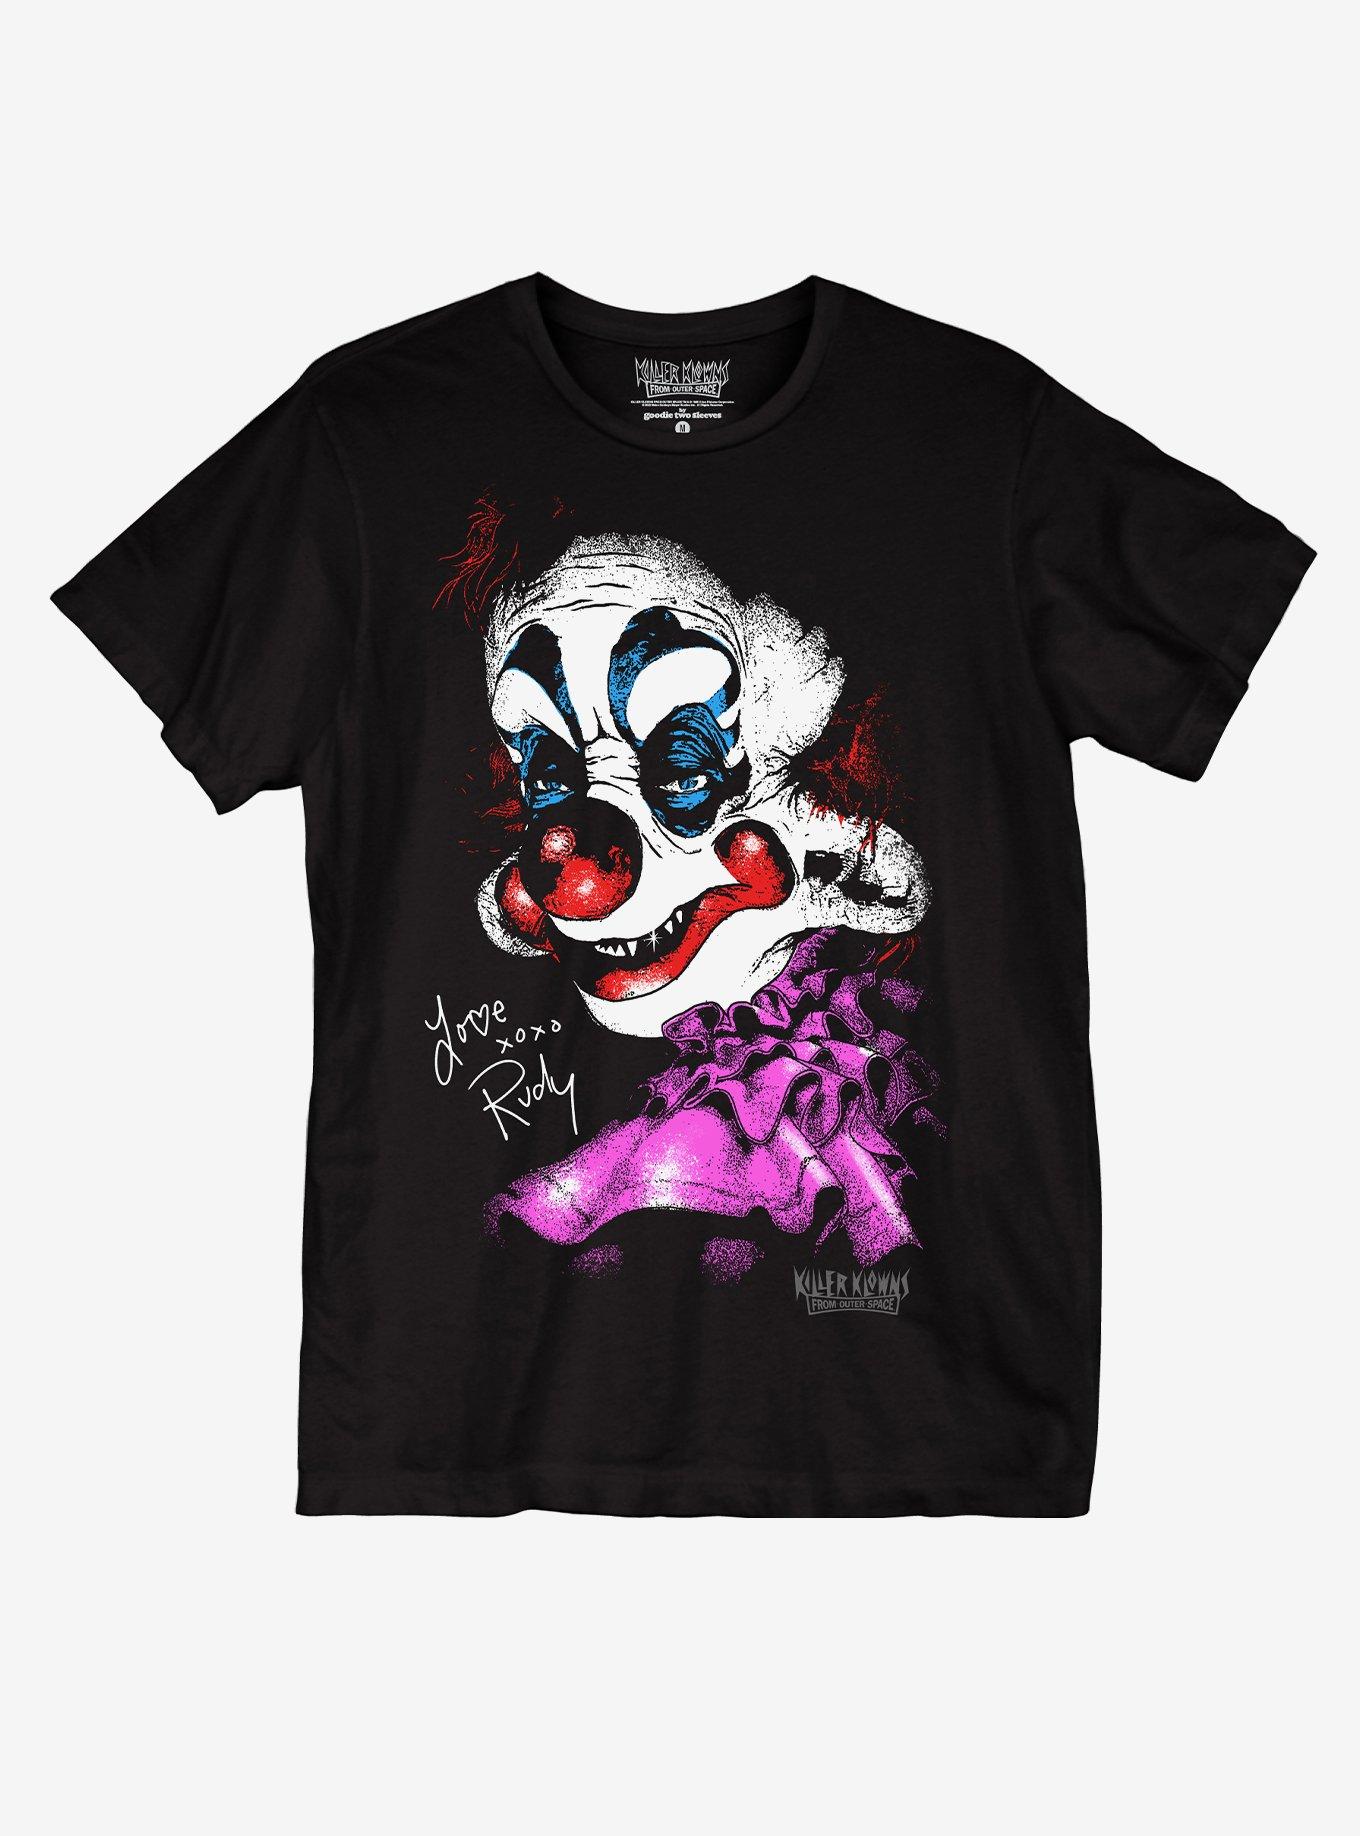 Killer Klowns From Outer Space Love Rudy T-Shirt, BLACK, hi-res